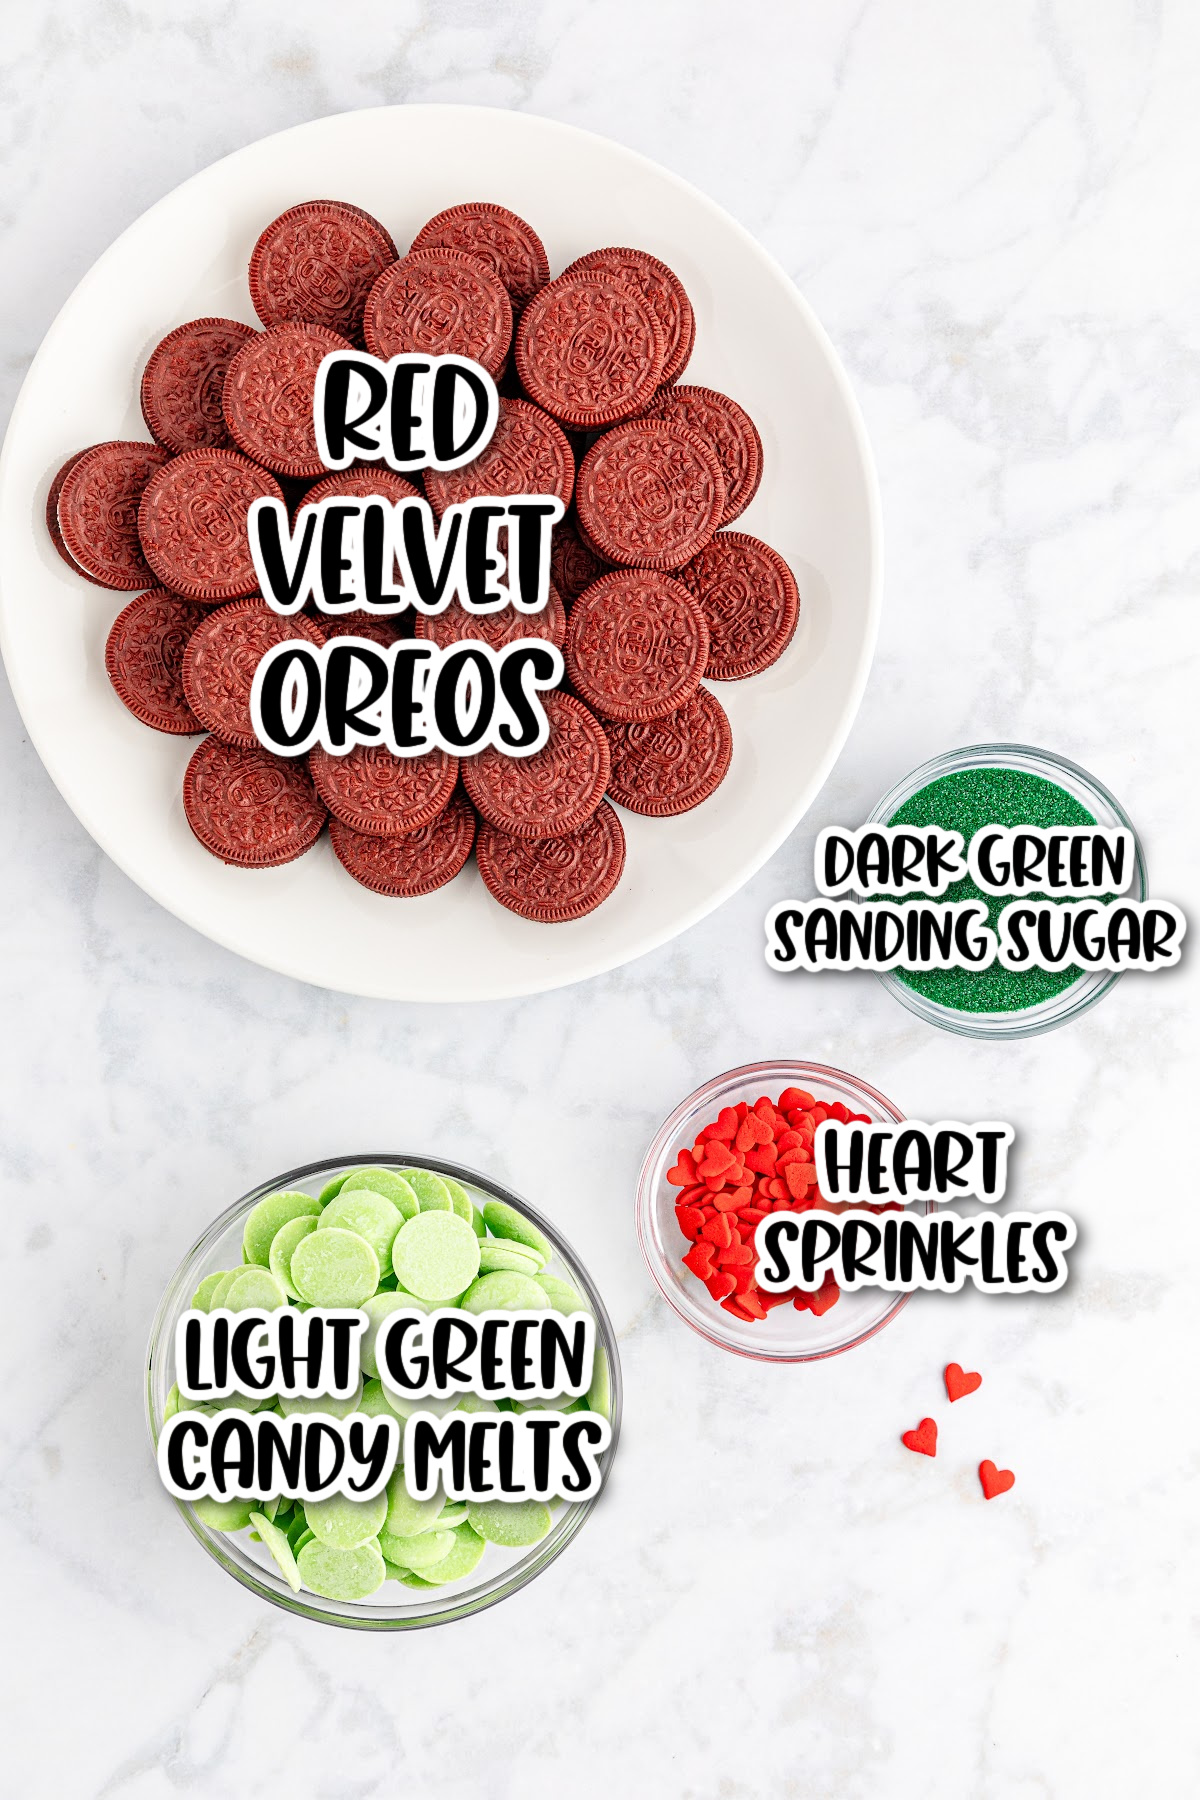 Ingredients for chocolate covered Grinch Oreos